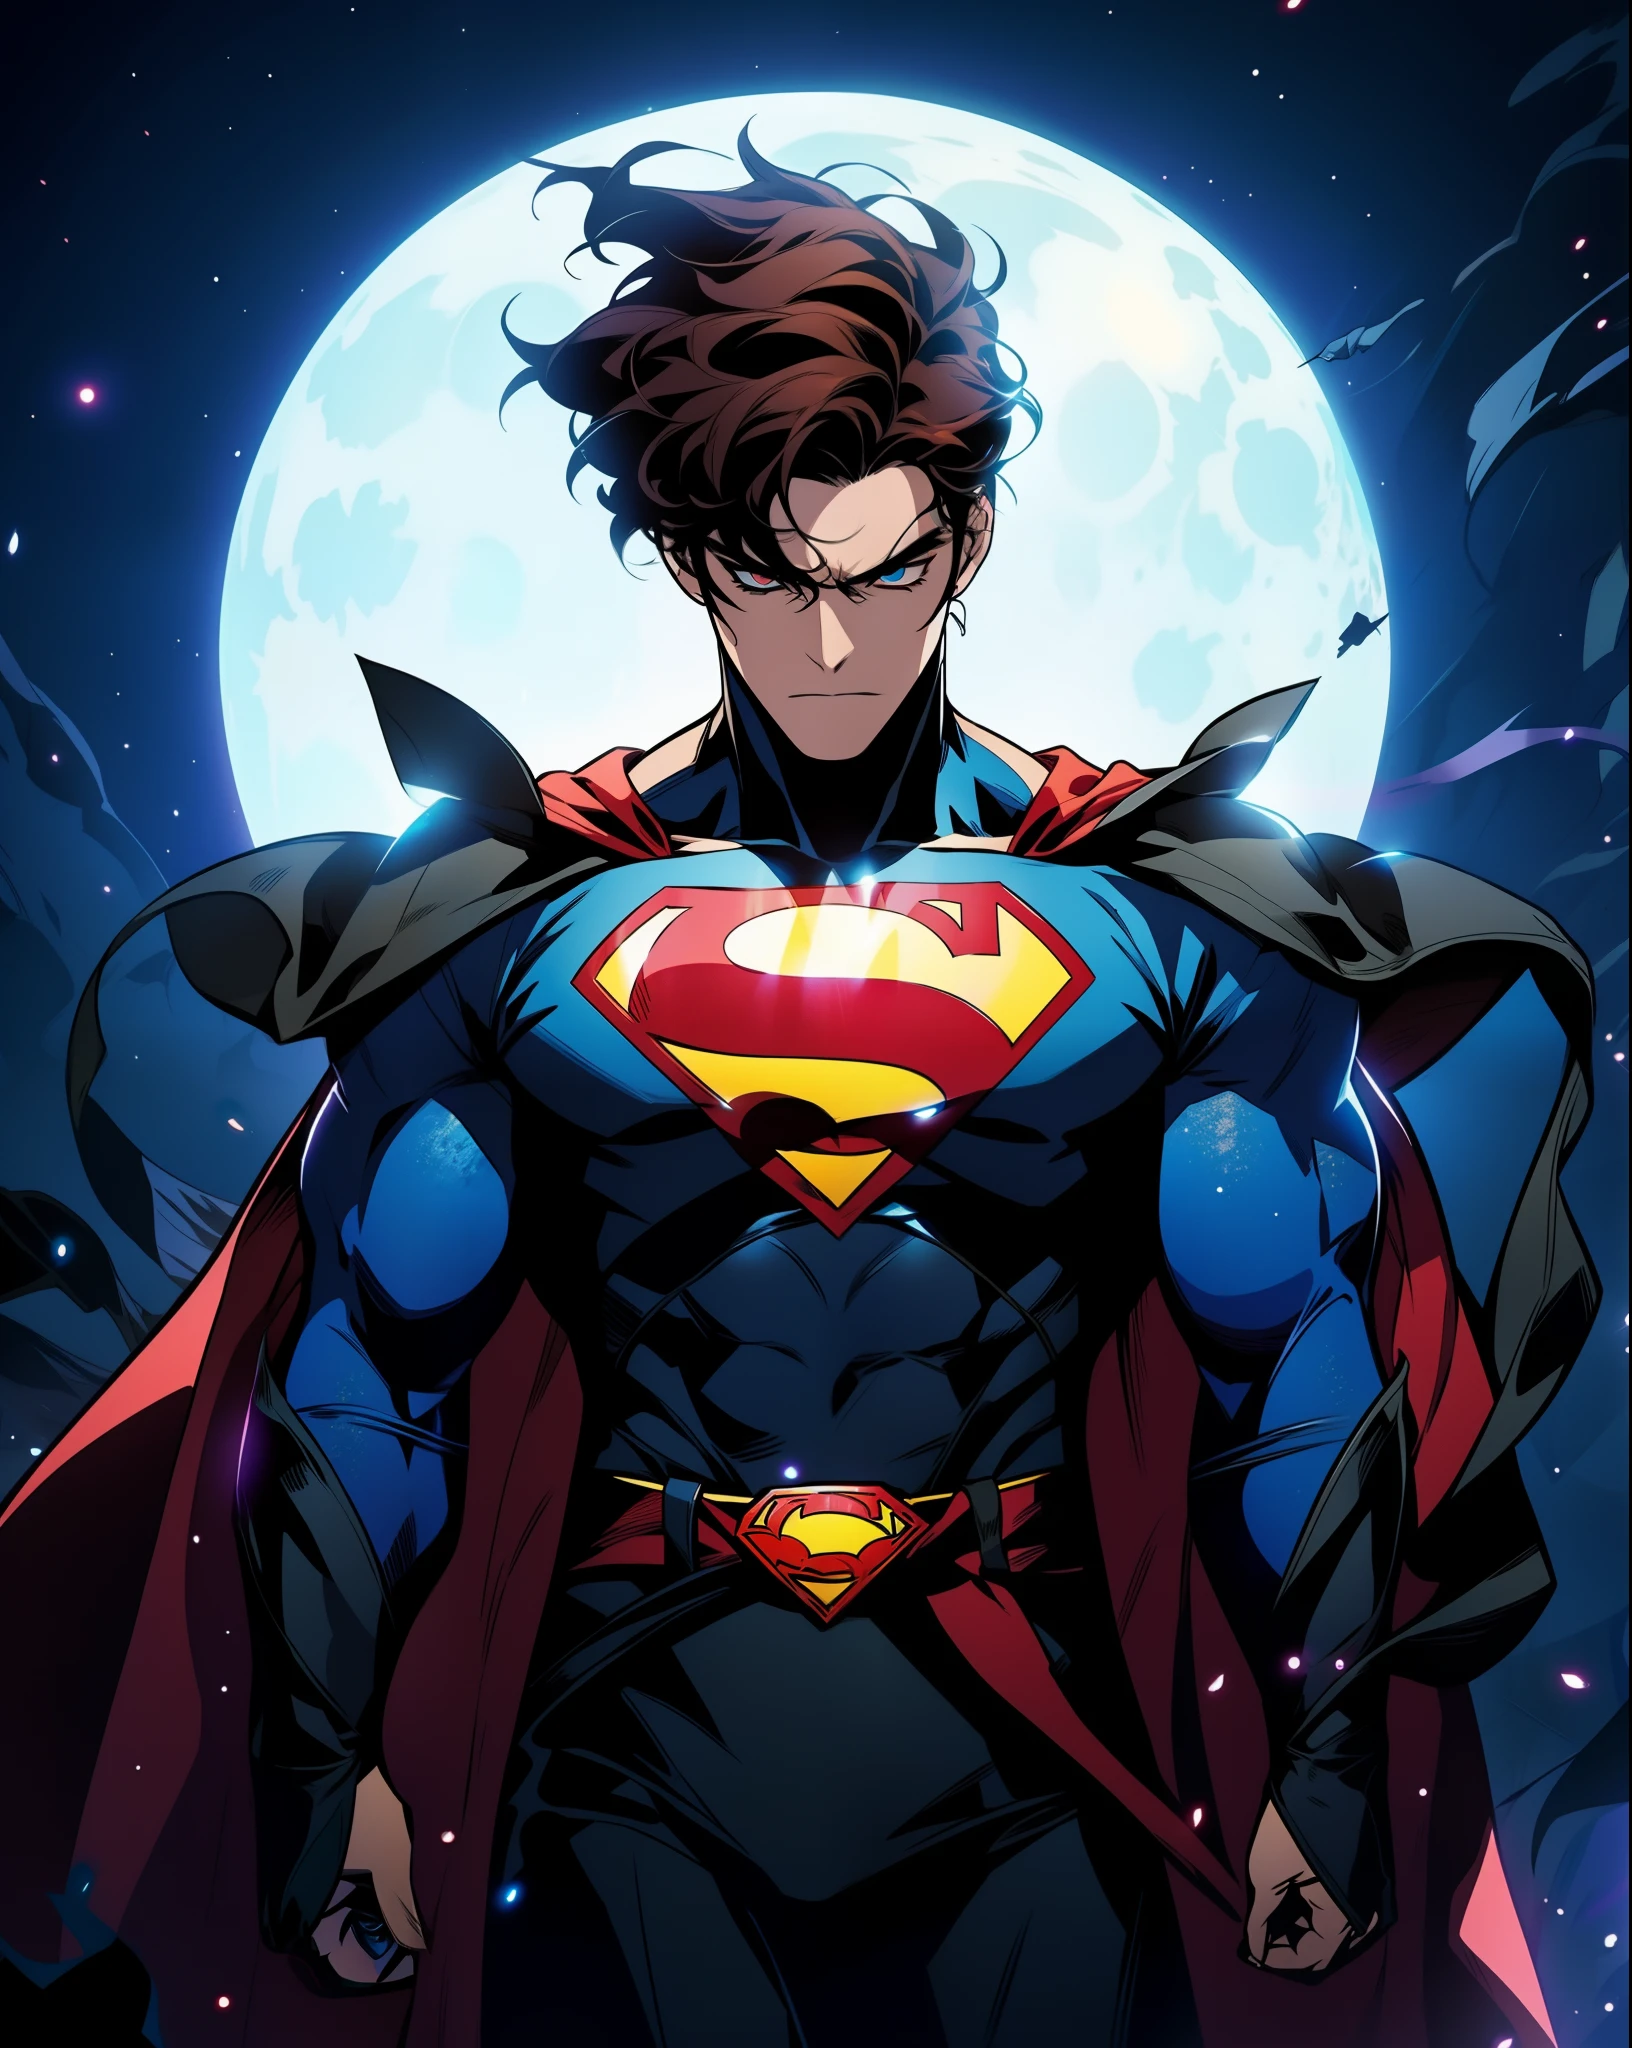 a cartoon 1male figure, superhero (similar to superman) in the dark with a full moon behind him, badass anime 8 k, superman (heroic appearance), anime style 4 k, super high quality art, super buff and cool, anime epic artwork, dc comics art style, the strongest superhero (unknown,  new form of strength), dark supervillain appearance, super hero art, epic comic book style, extremely detailed artgerm, profile picture 1024px, supervillain eyes,